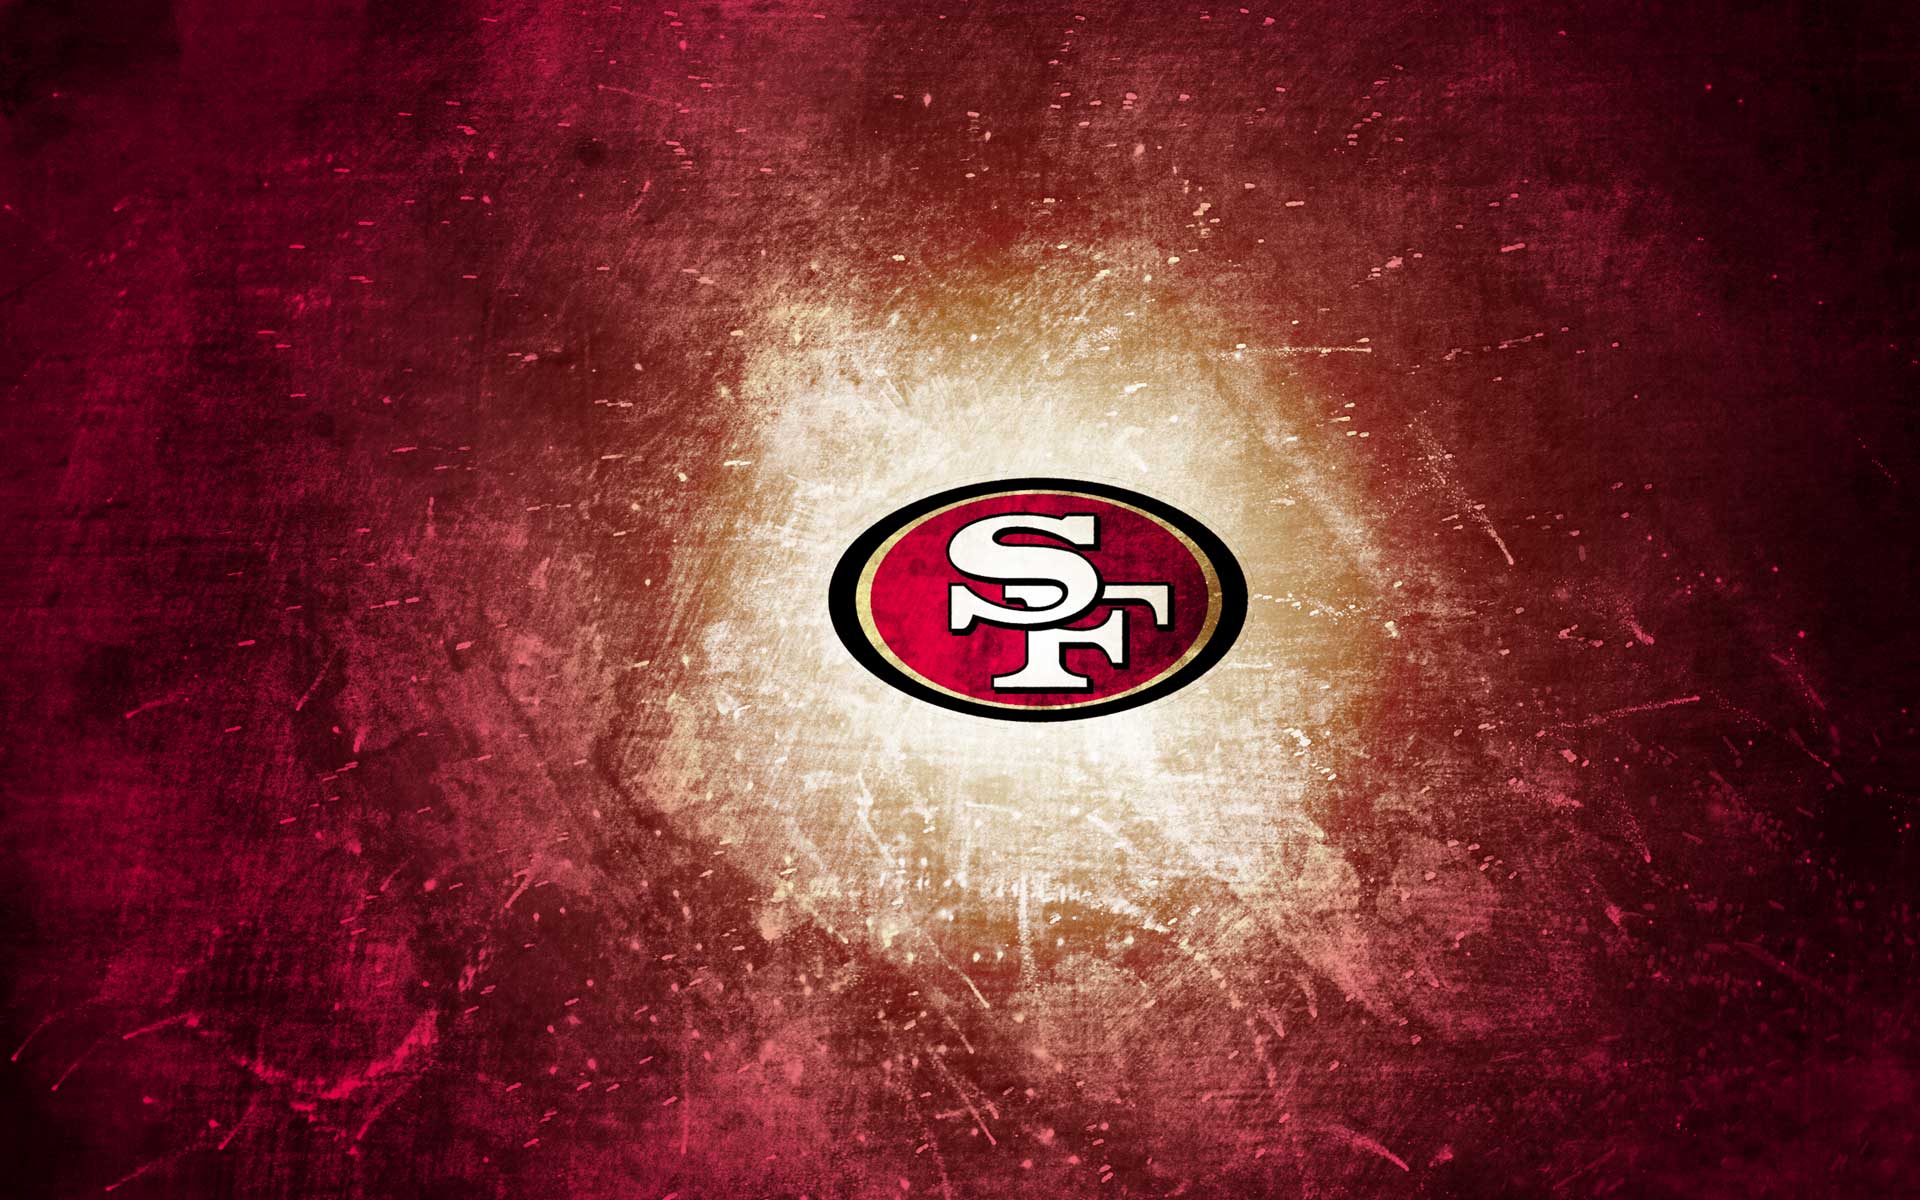 San Francisco 49ers on Twitter May the Fourth wallpaper be with you  MayThe4th x WallpaperWednesday httpstco8KIUpNOe20  Twitter